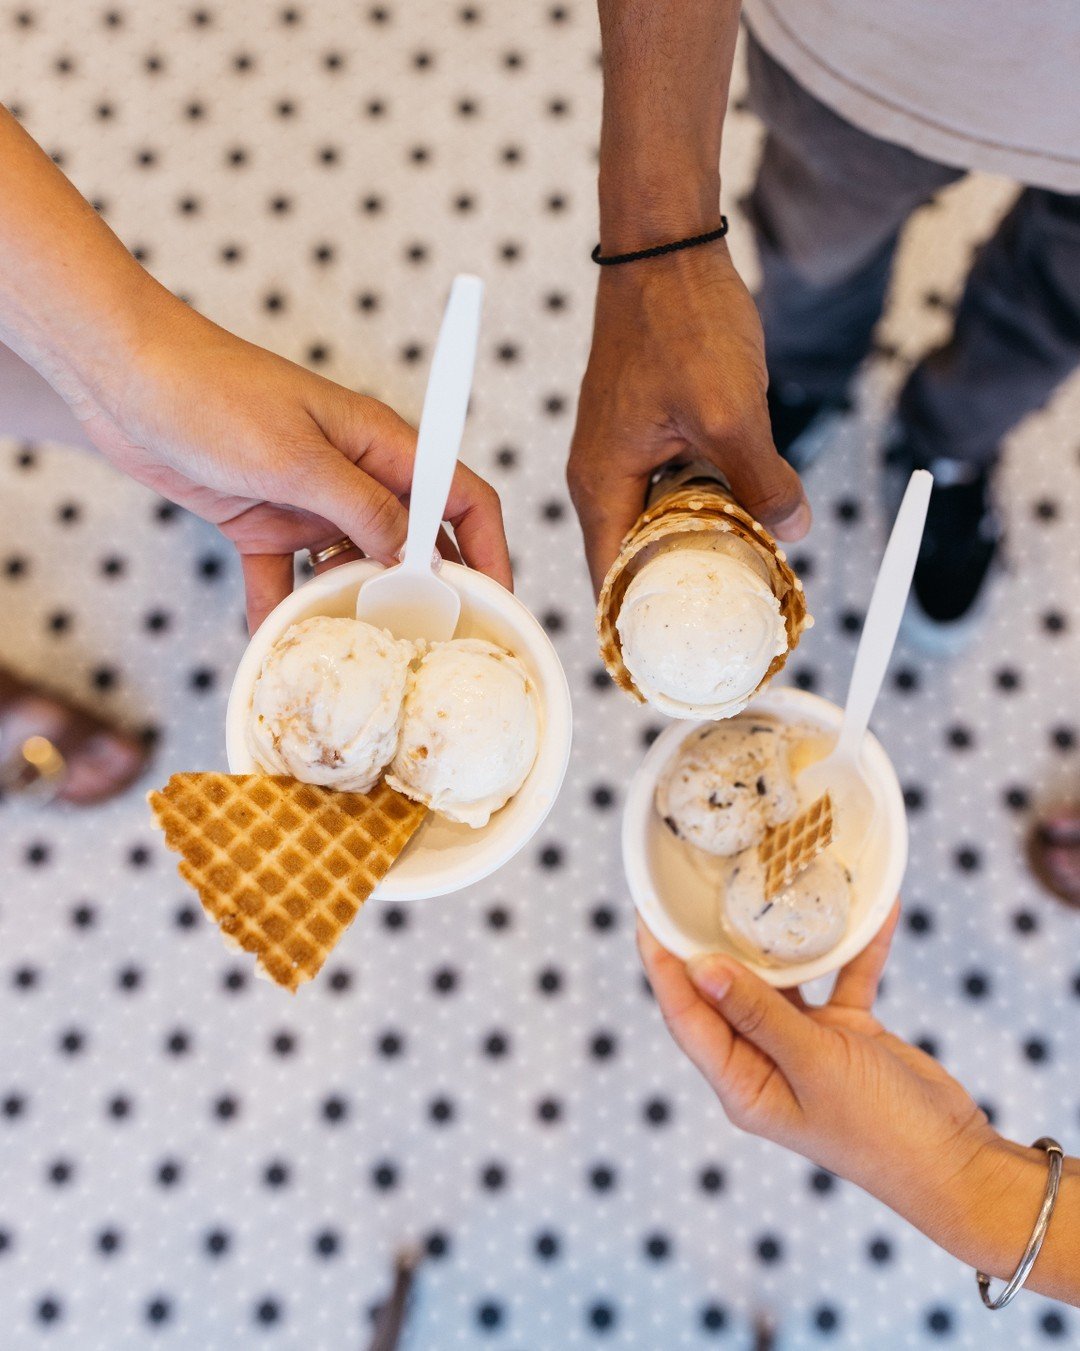 Indulge in a scoop of happiness at @jenisicecreams in The Beacon! 🍦

Their creamy concoctions are crafted with love and the finest ingredients, bringing joy with every spoonful. Whether you're a classic vanilla lover or an adventurous flavor explore